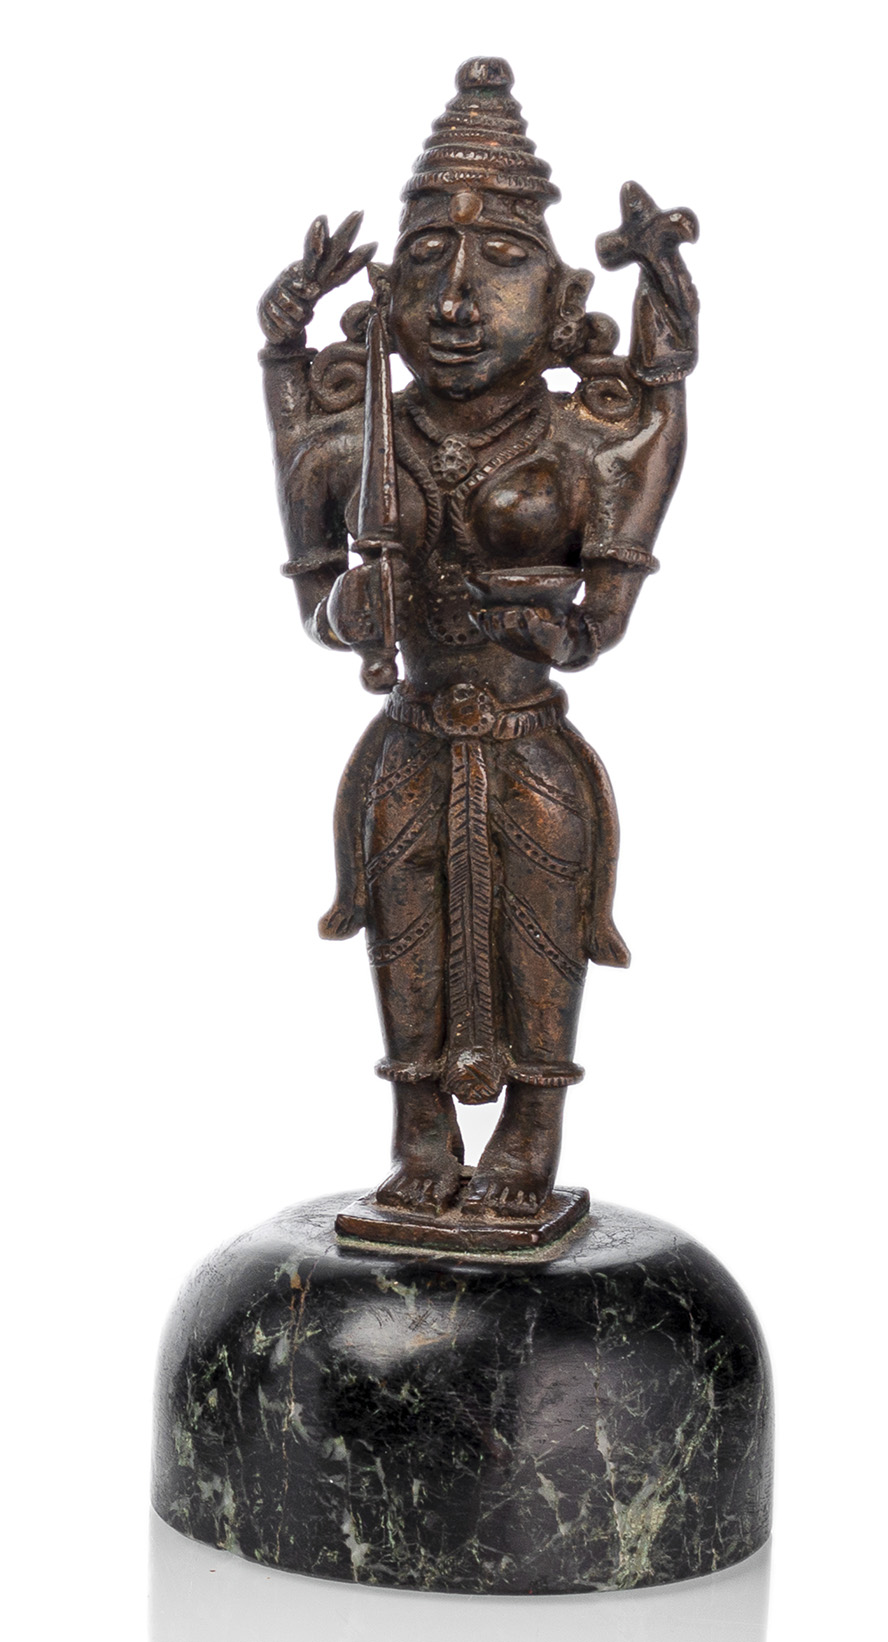 <b>A BRONZE FIGURE OF PROBABLY THE FOUR-ARMED KALI</b>